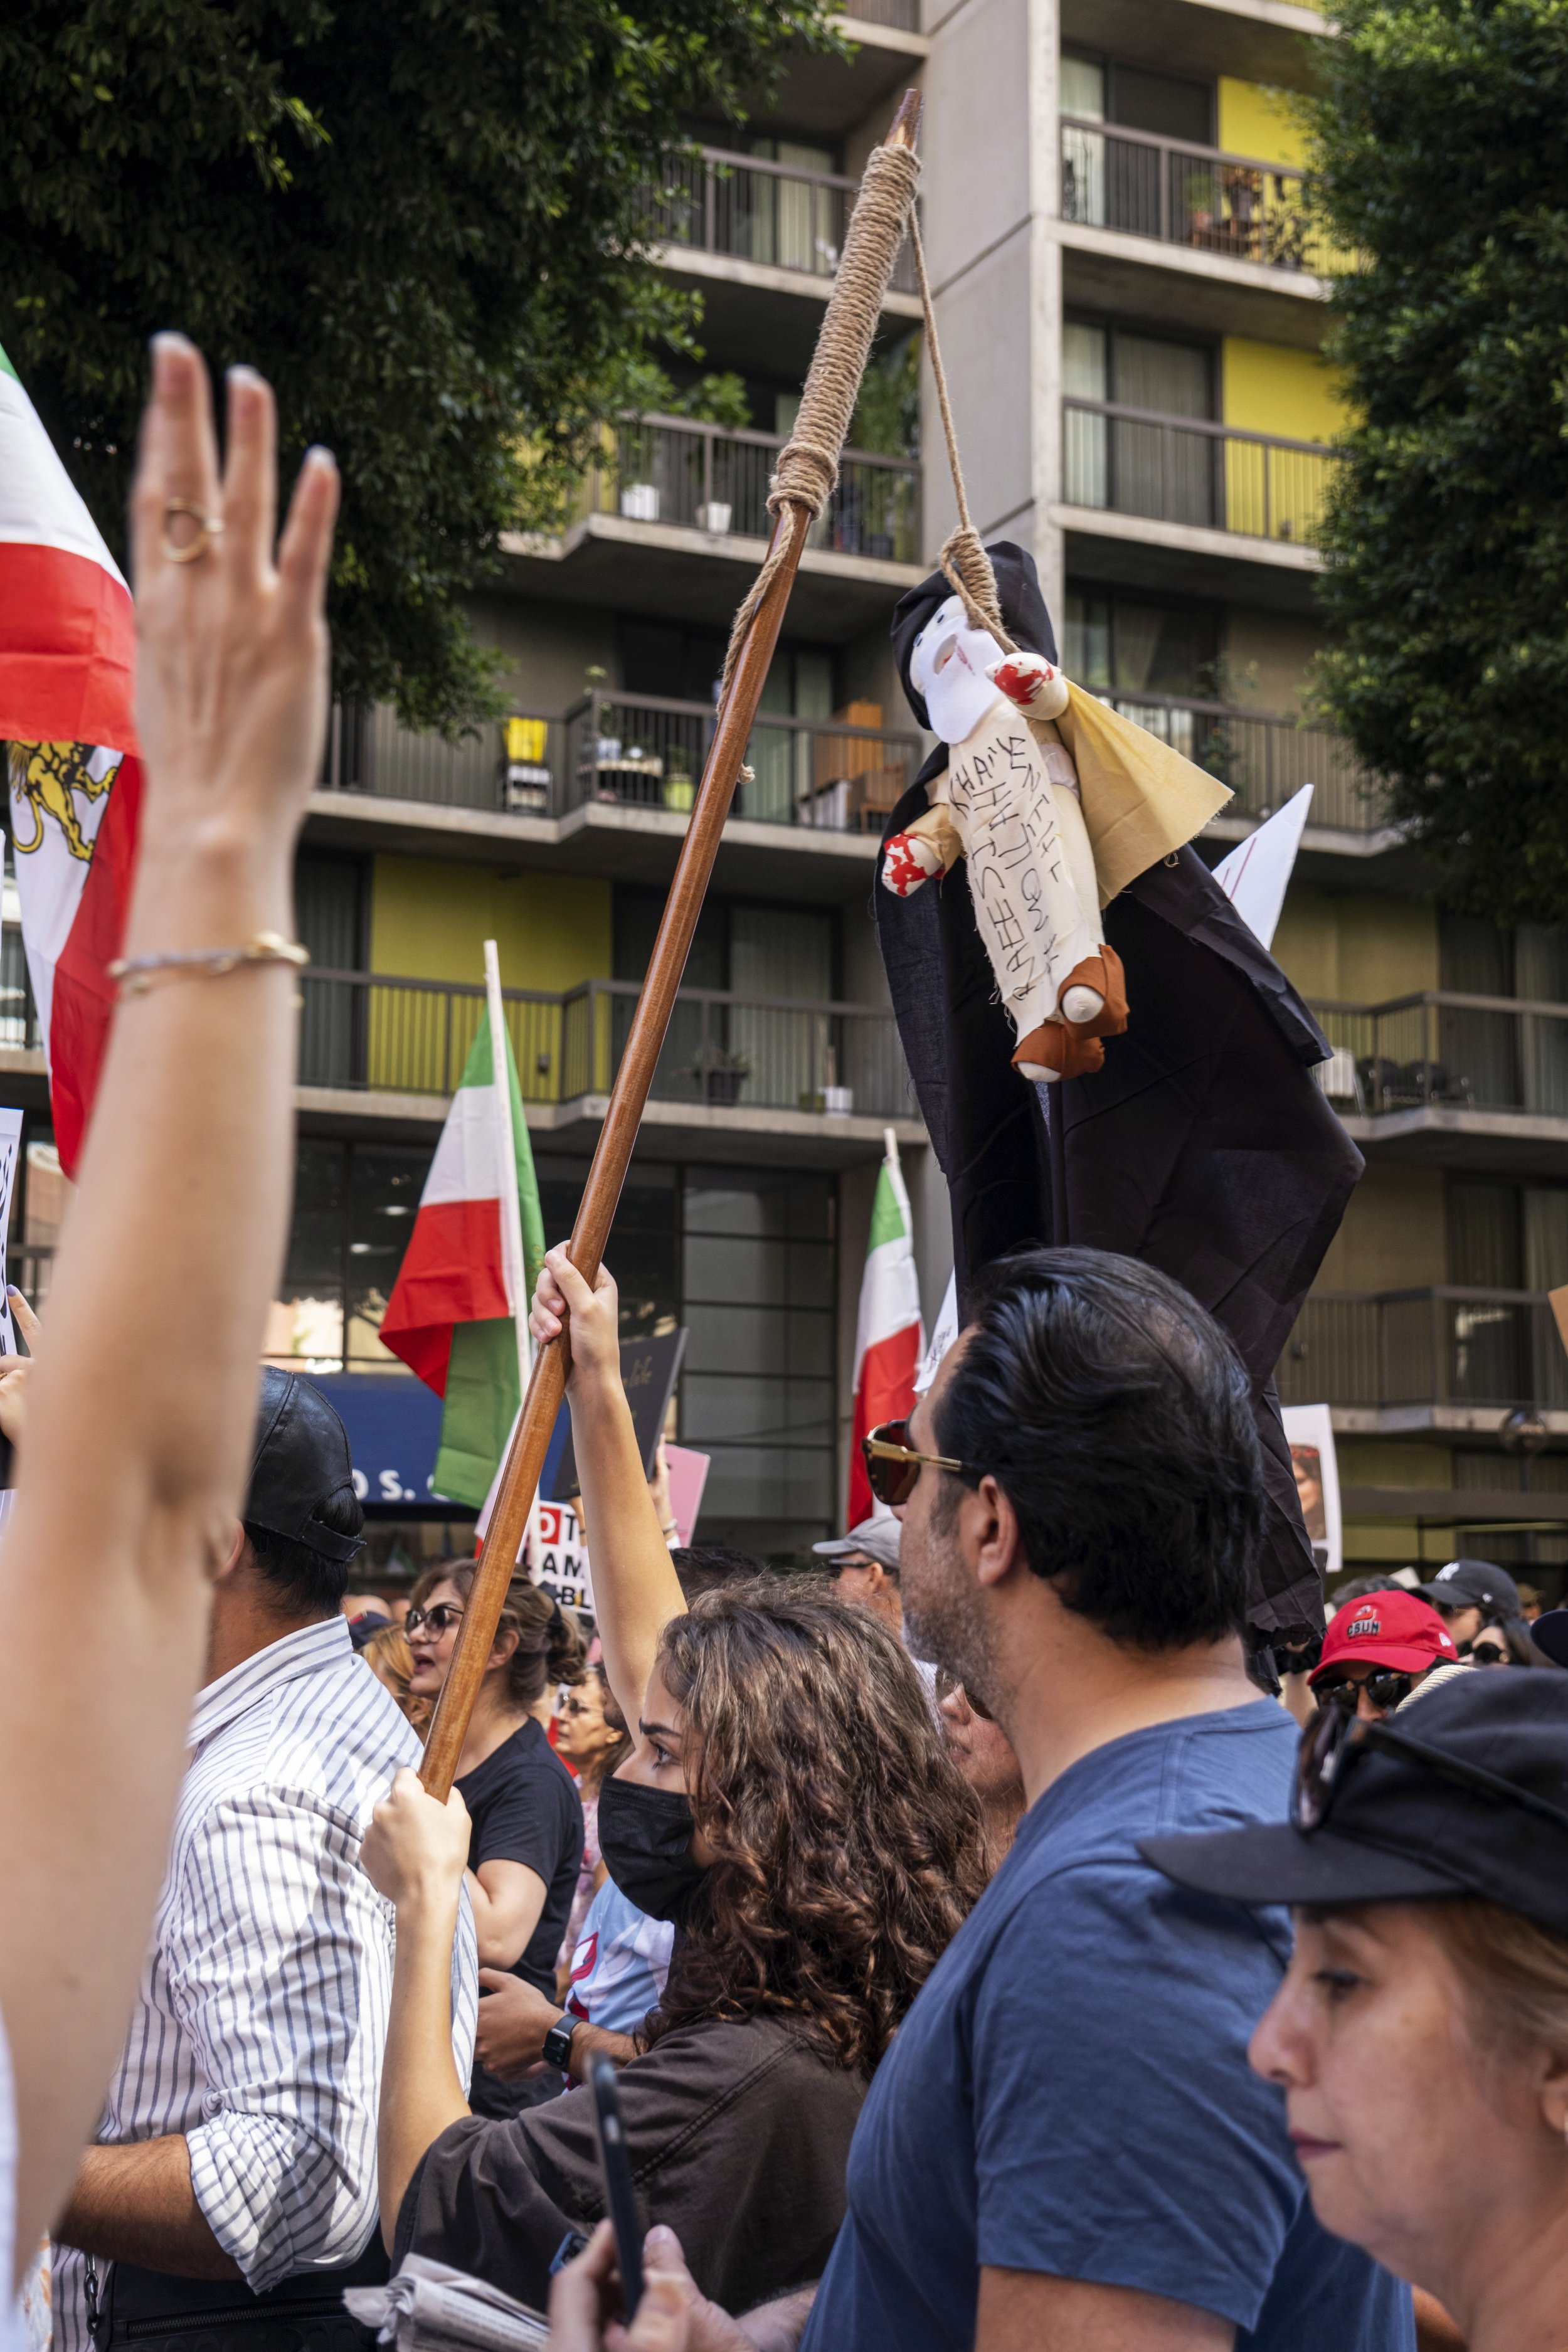  Woman holds a wooden pole, with a doll hanging from a tied rope. The doll whose hands are painted red, has the names of the Freedom Supreme Leader and the President of Iran, with the hashtag Mollah, written on its garb, at the Freedom Rally for Iran